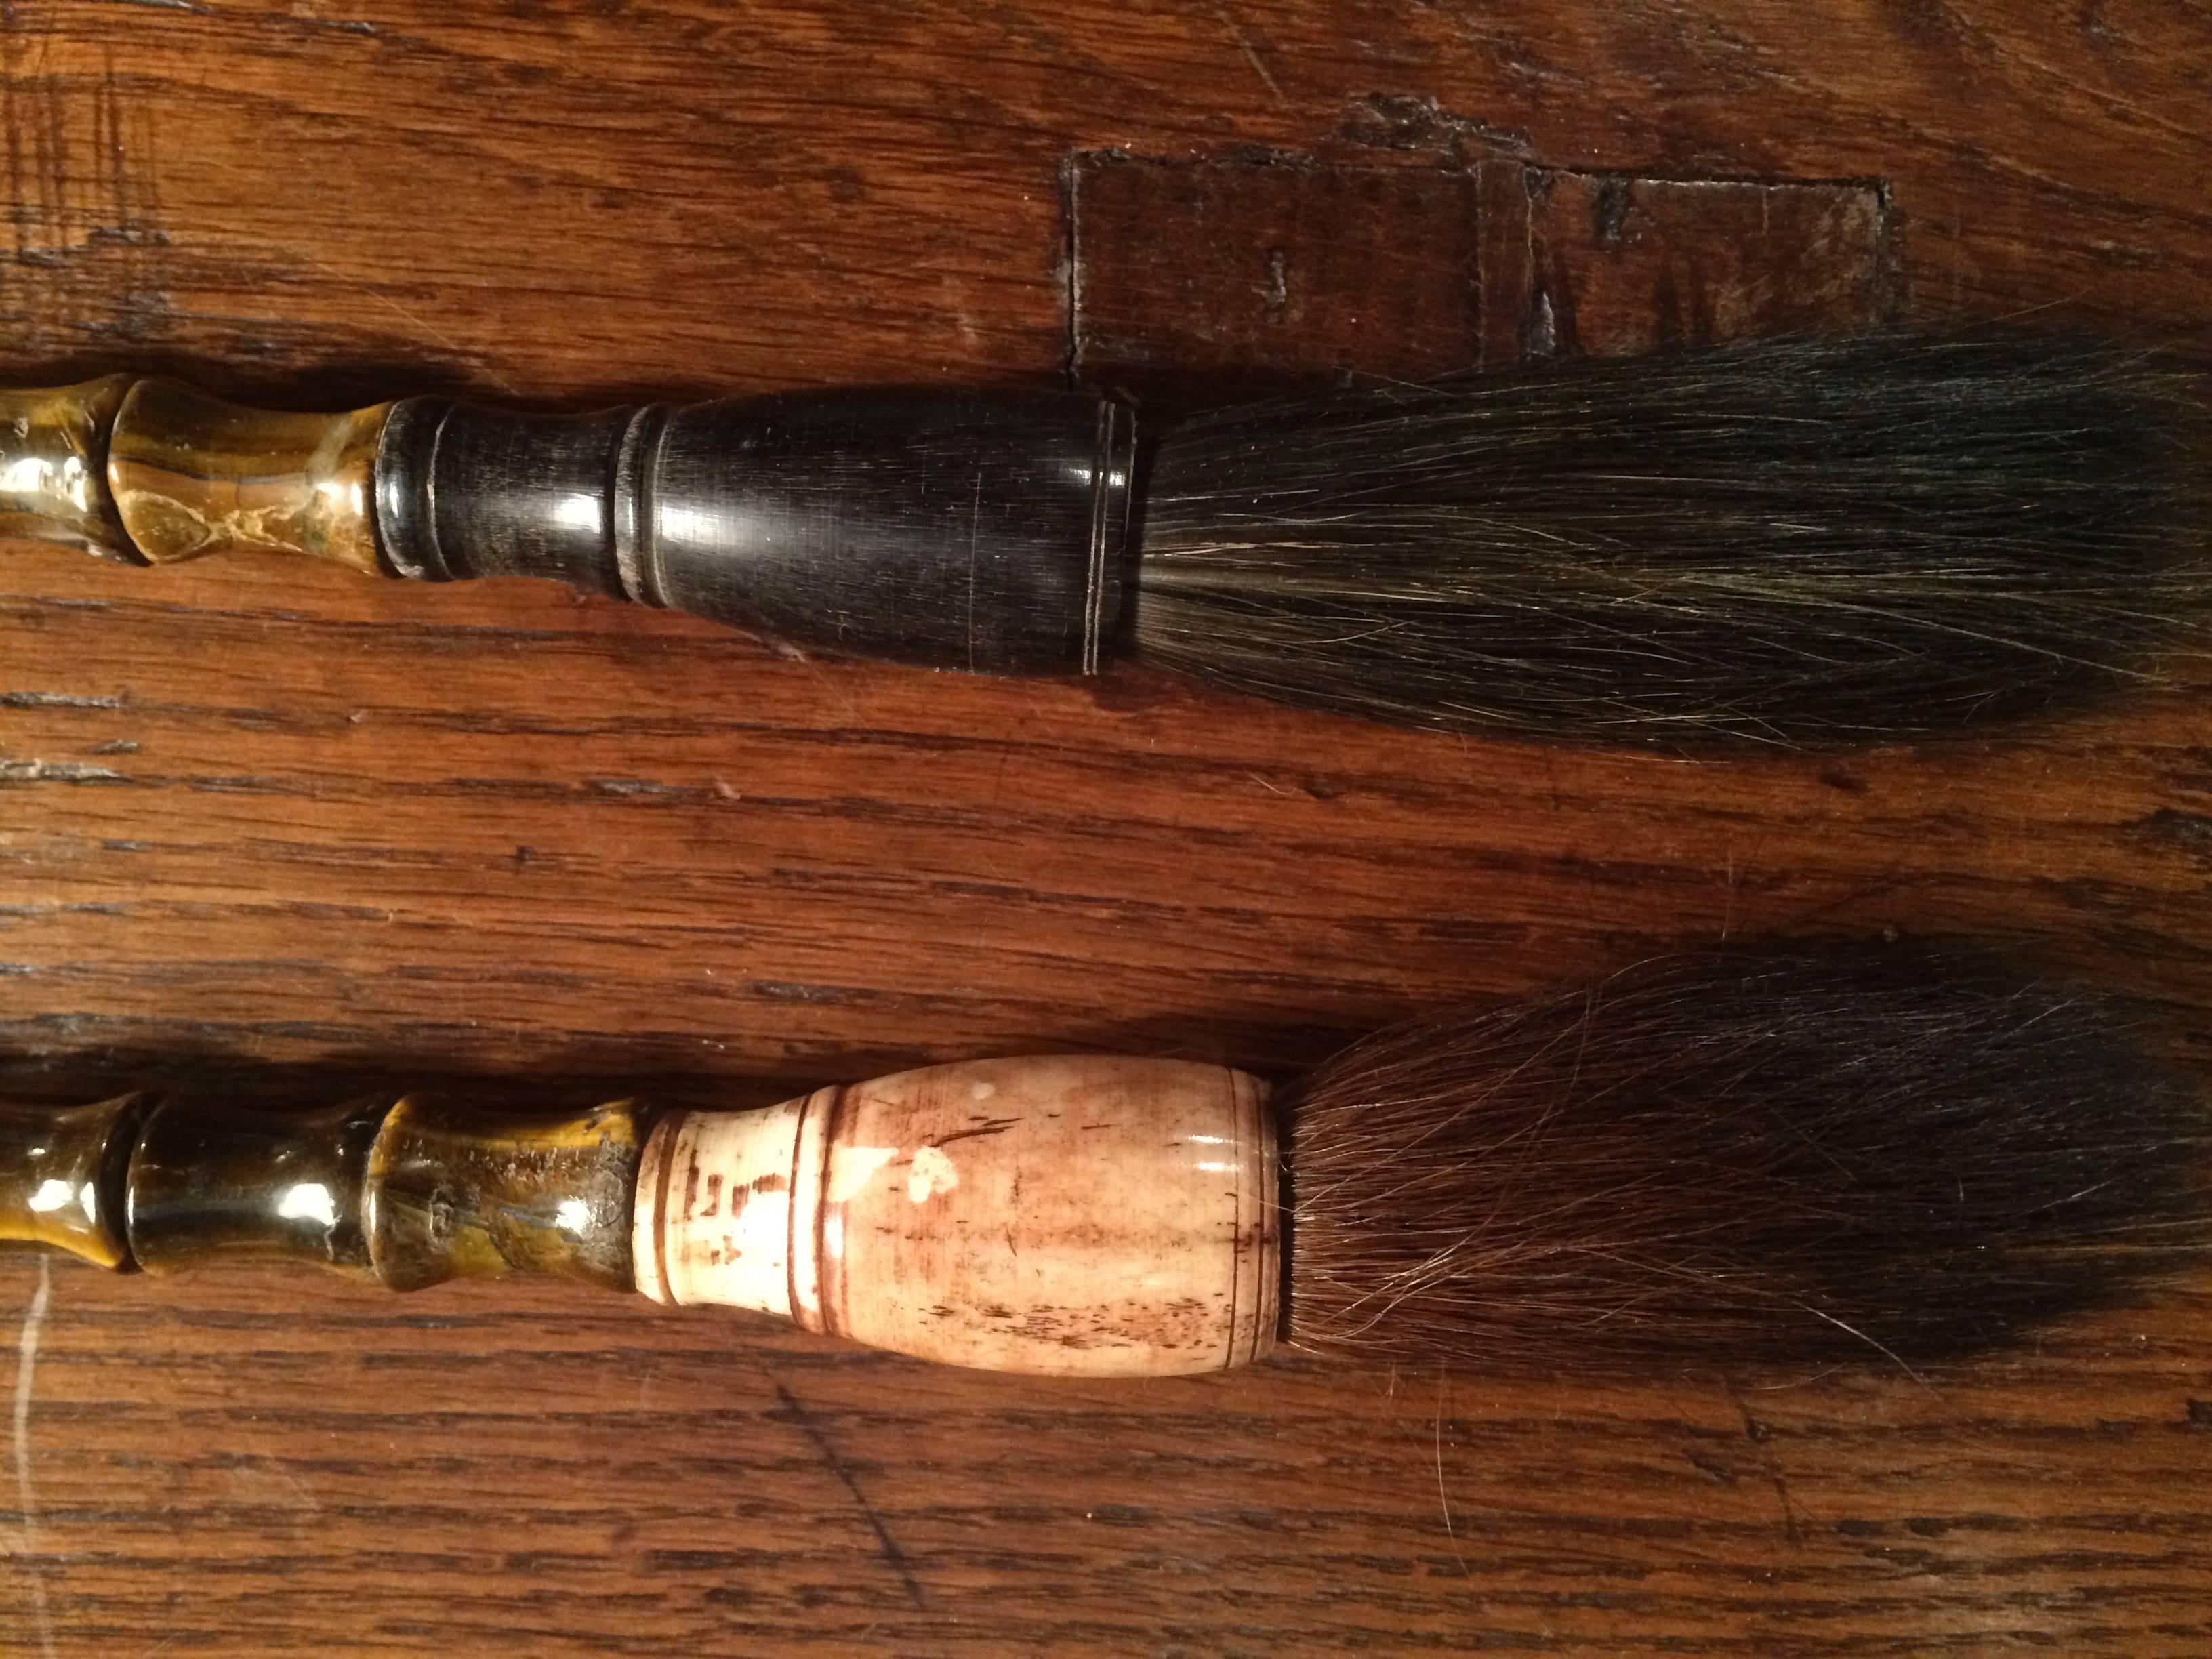 Group of four Chinese calligraphy brushes, two of polished bone and red coral, one of bone and tigers eye and one of ebony and tigers eye. All with horse hair brushes.
12 inches the longest, brush included.